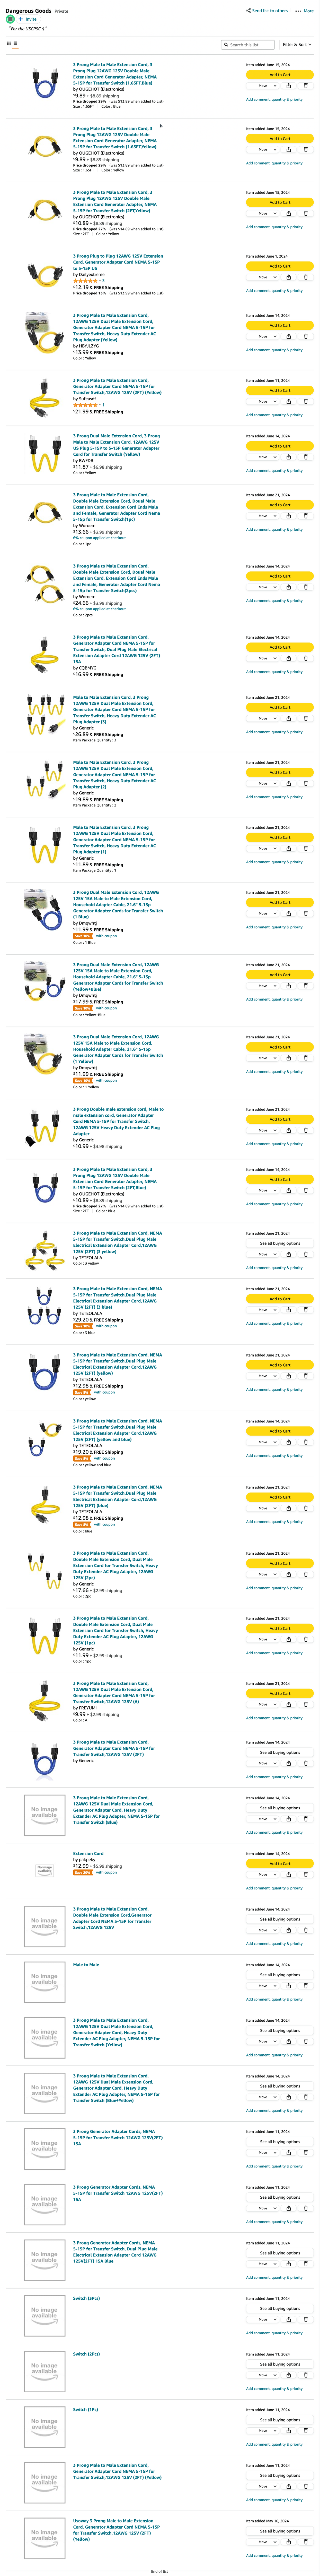 really long screenshot of an amazon product list, all suicide cords, 26 available for purchase.